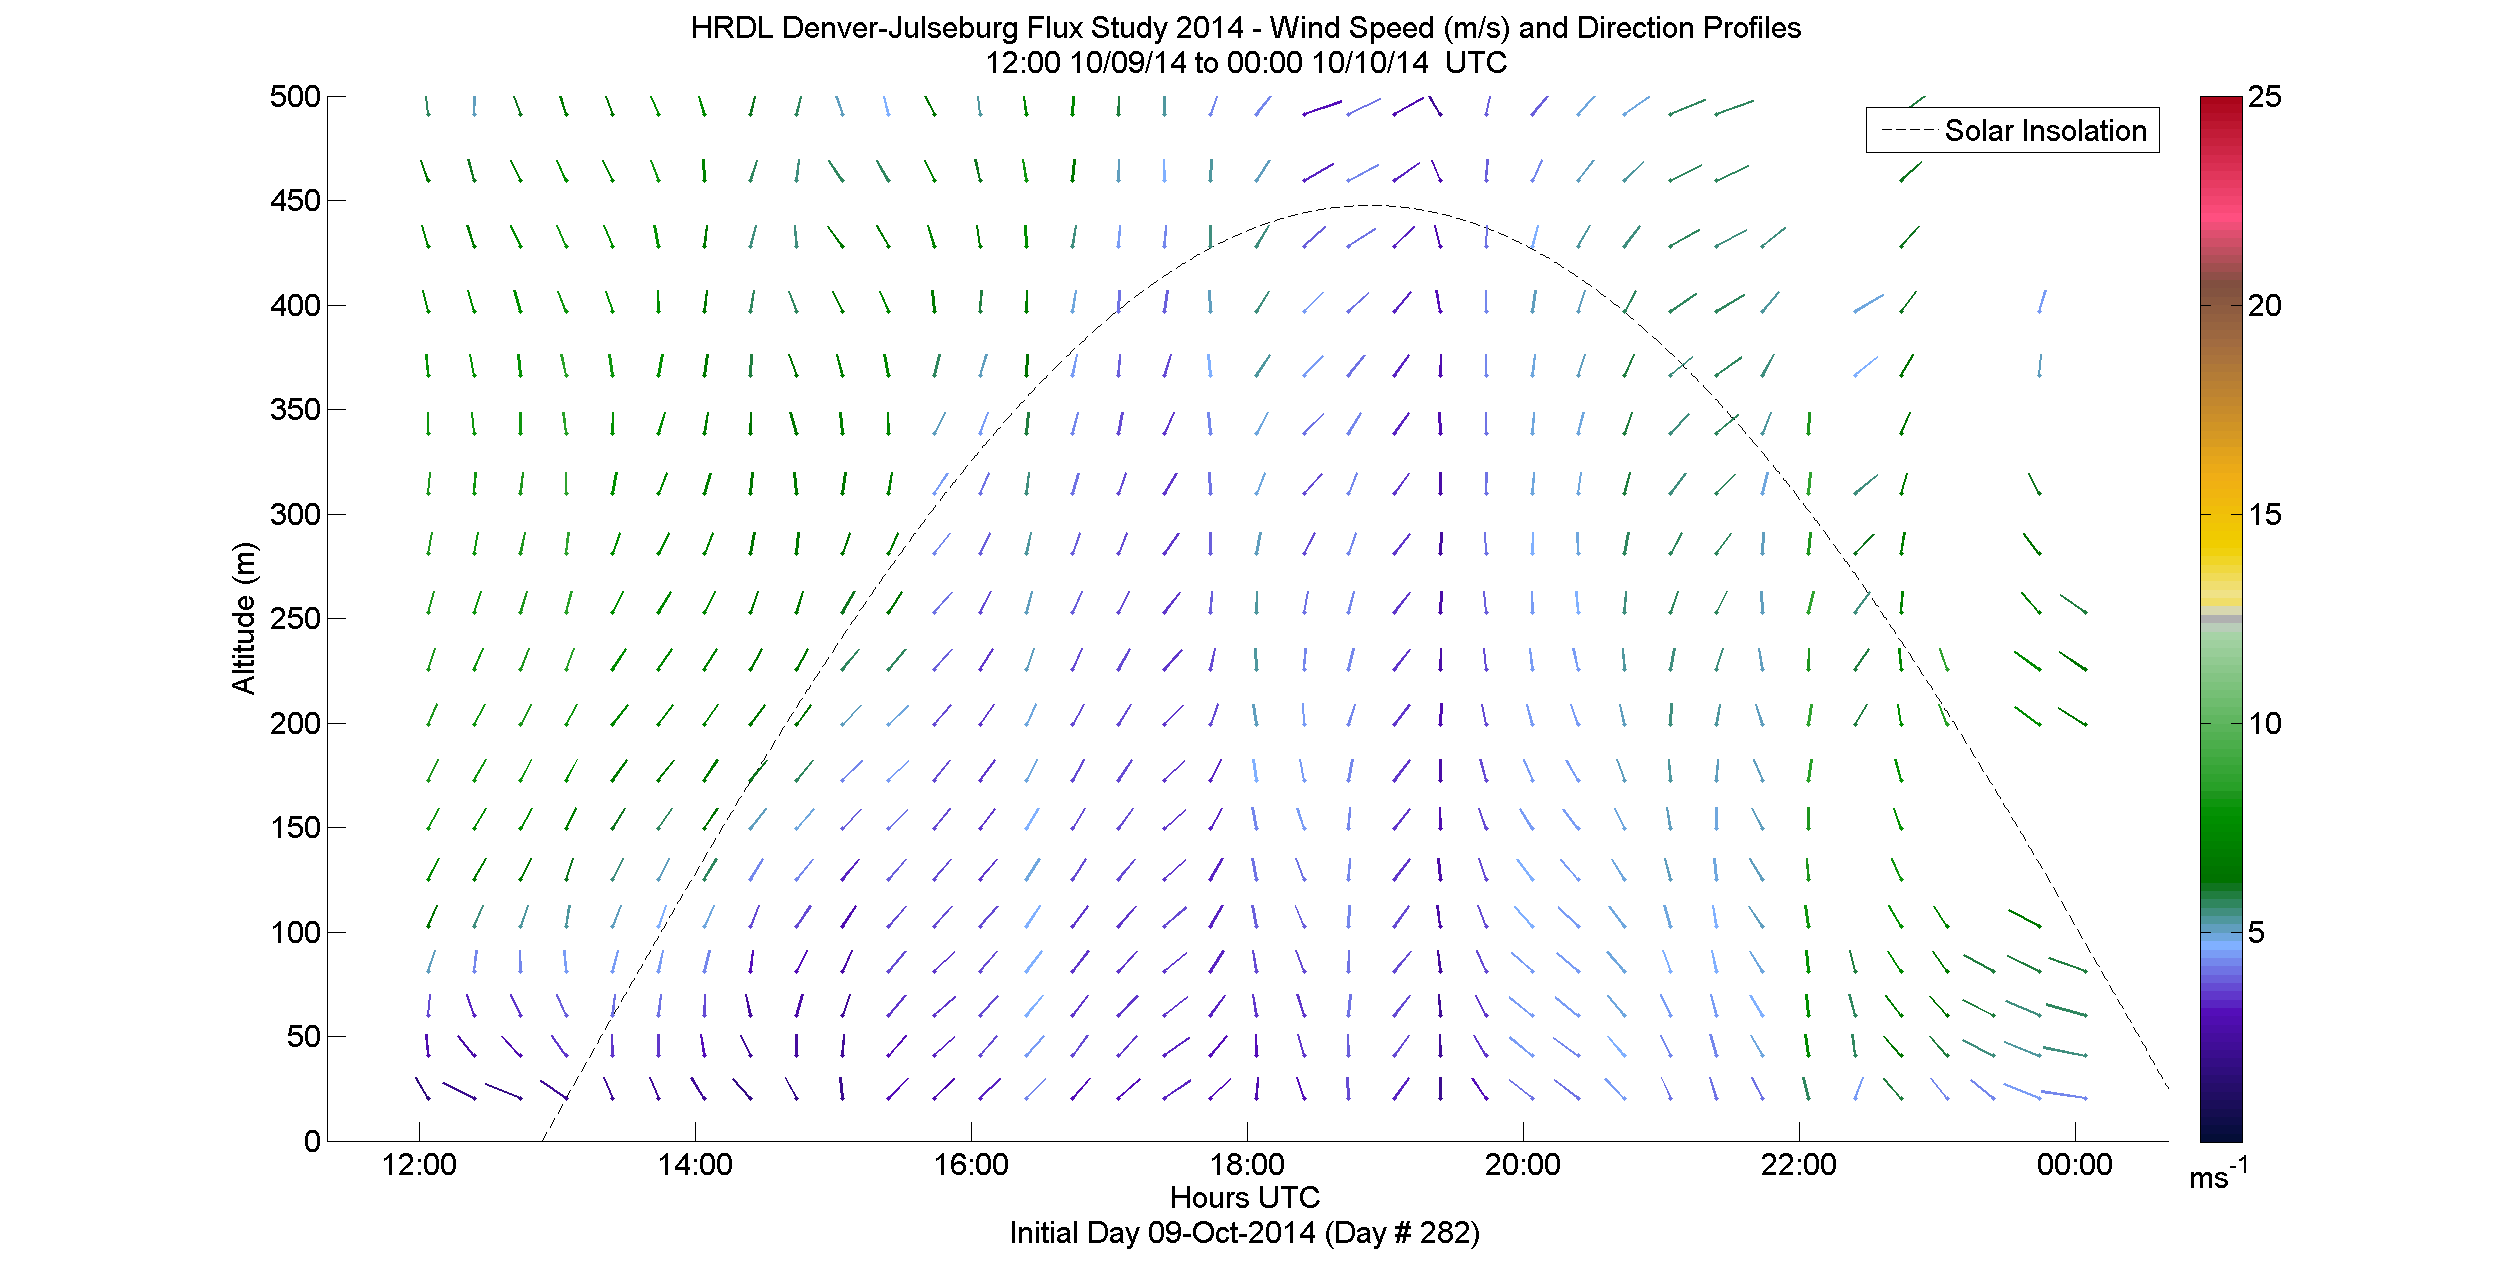 HRDL speed and direction profile - October 9 pm